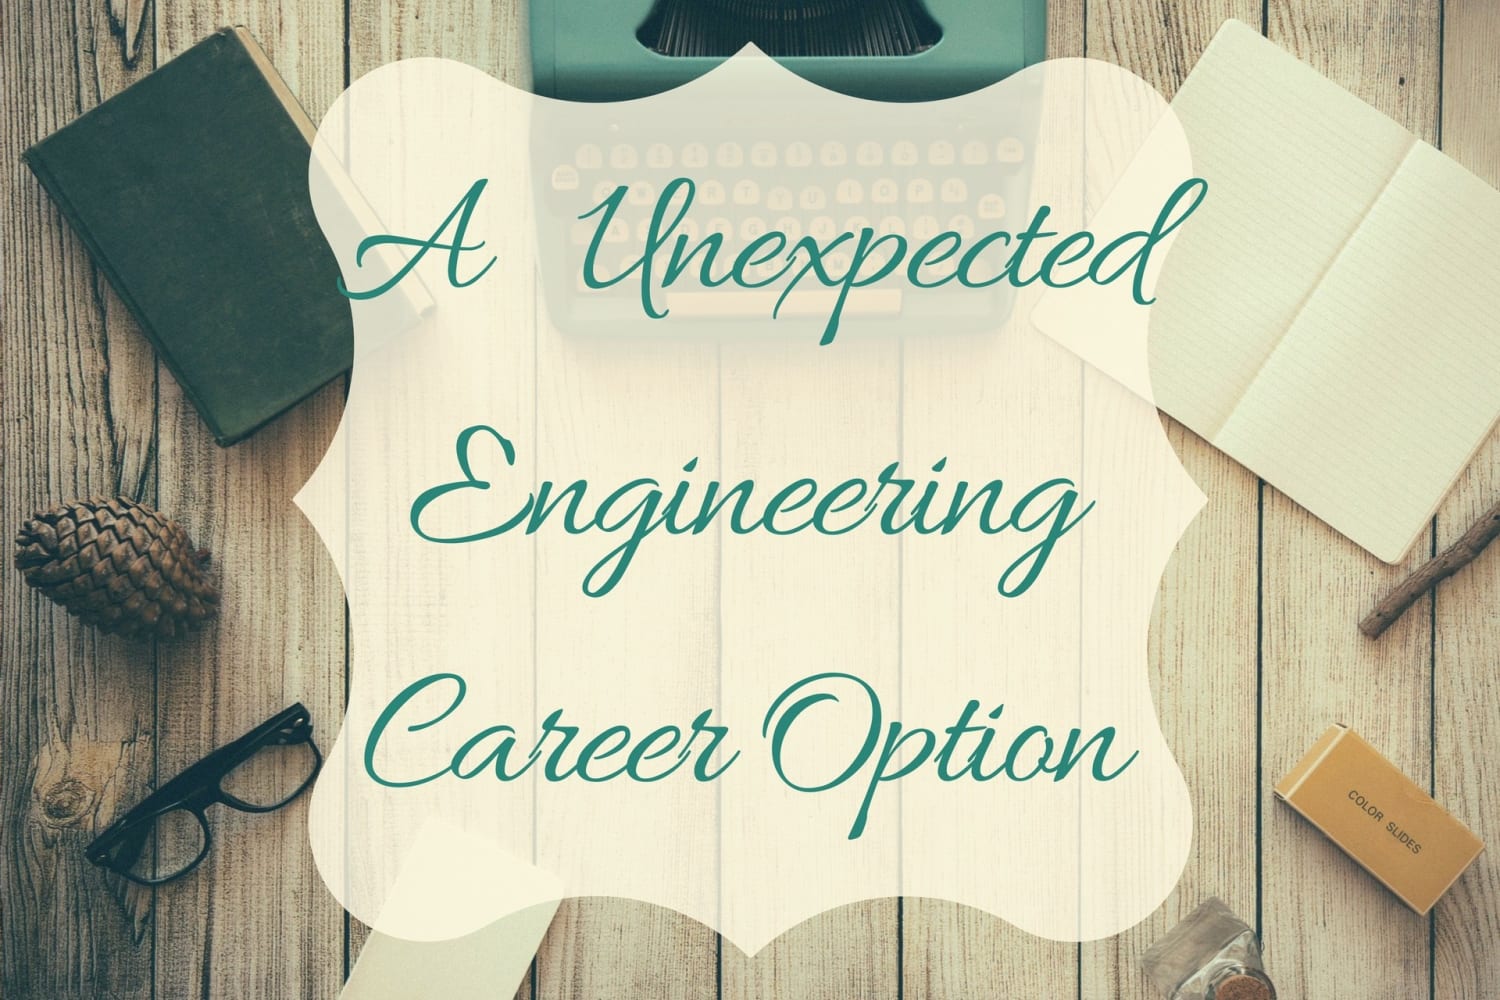 An Unexpected Engineering Career Option - From Engineer to Stay at Home Mom